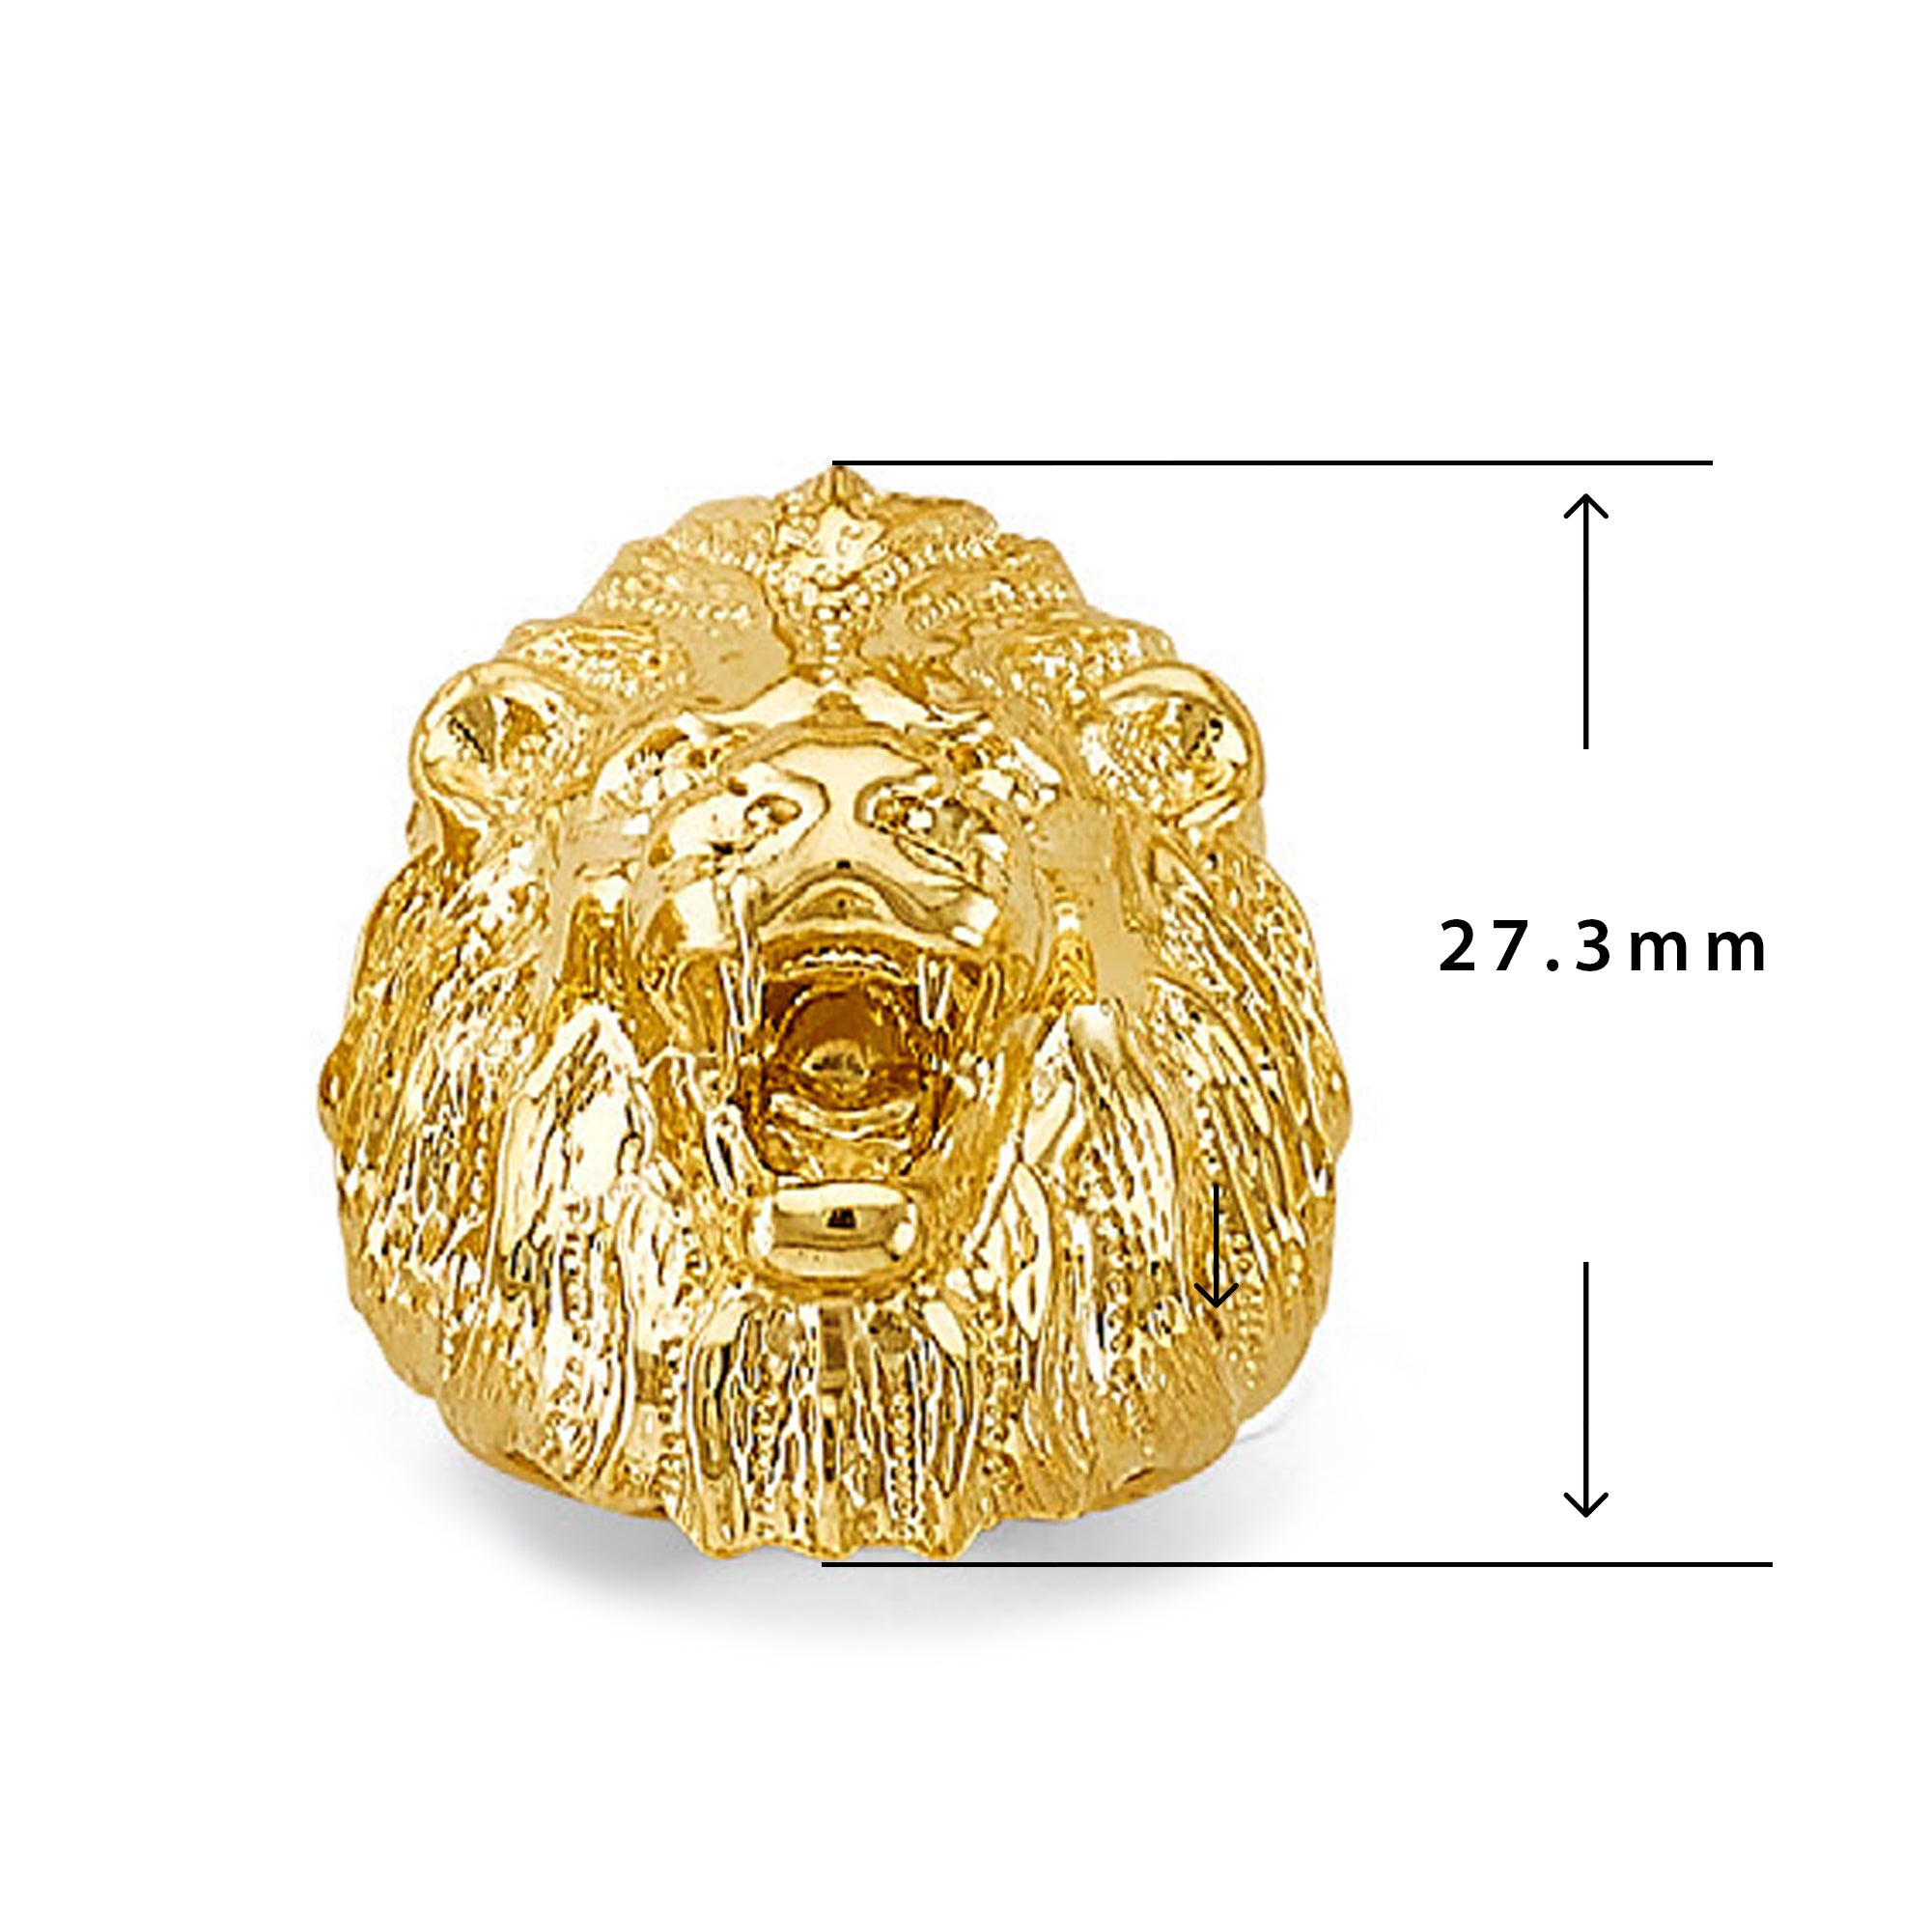 Fierce Roaring Lion Ring in Solid Gold with Measurement